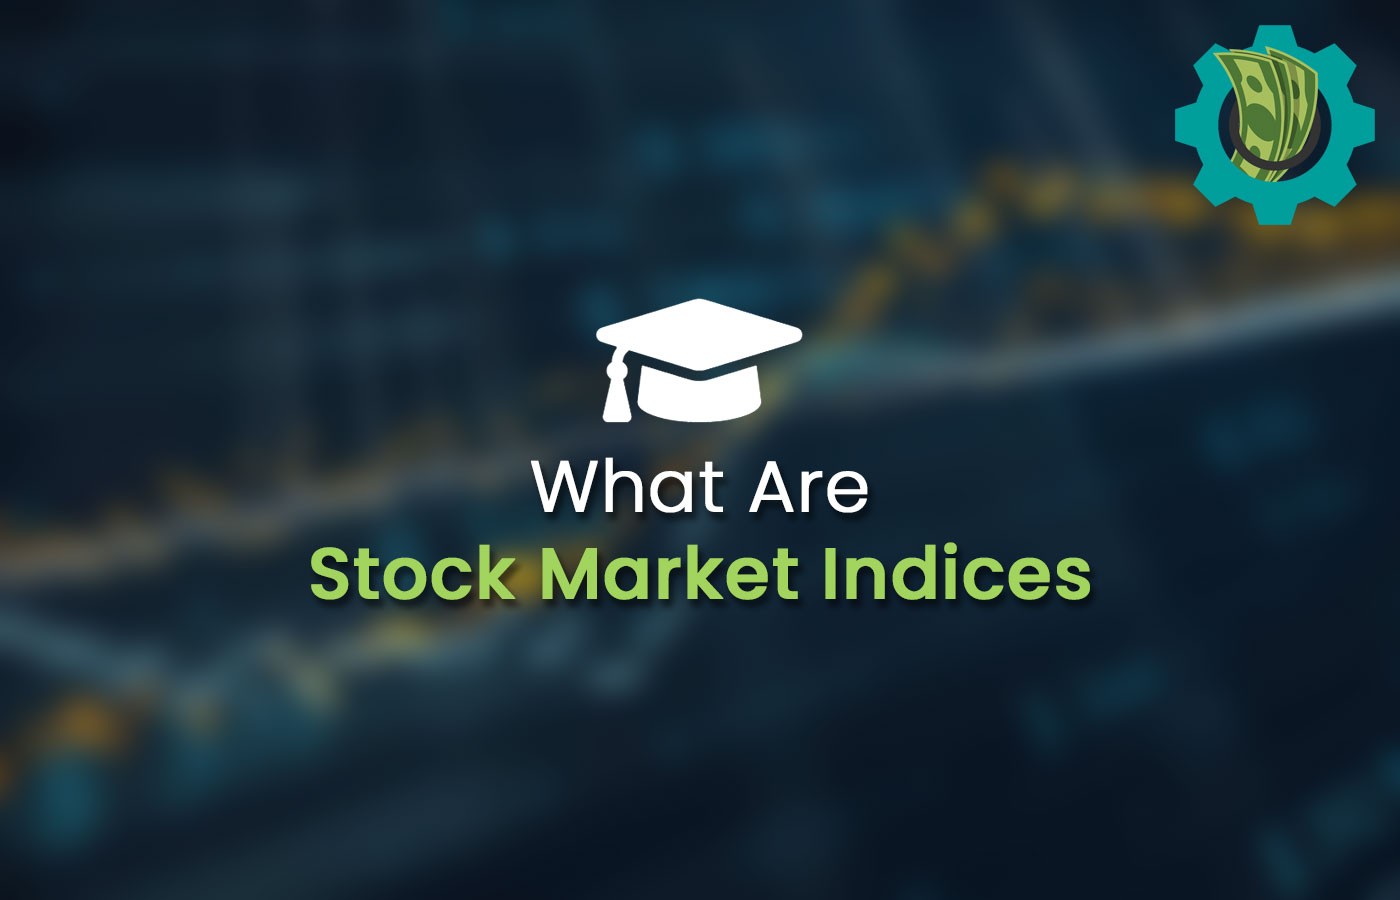 Technical charts of UK stock market indices